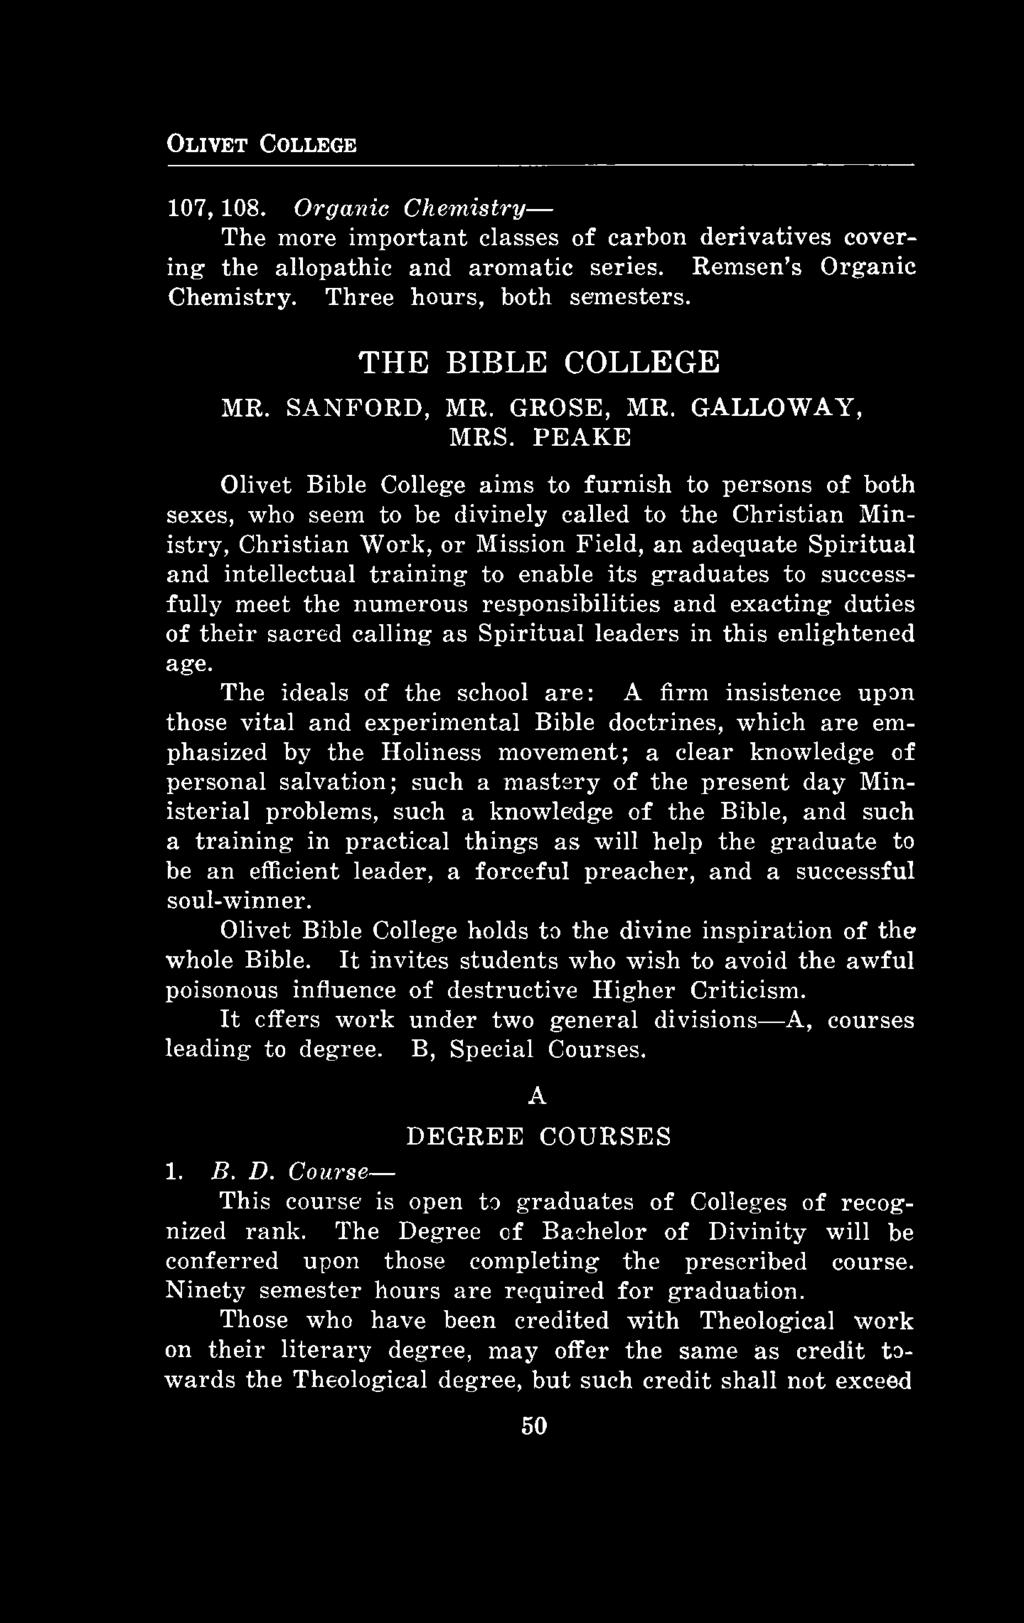 PEAKE Olivet Bible College aims to furnish to persons o f both sexes, who seem to be divinely called to the Christian Ministry, Christian Work, or Mission Field, an adequate Spiritual and